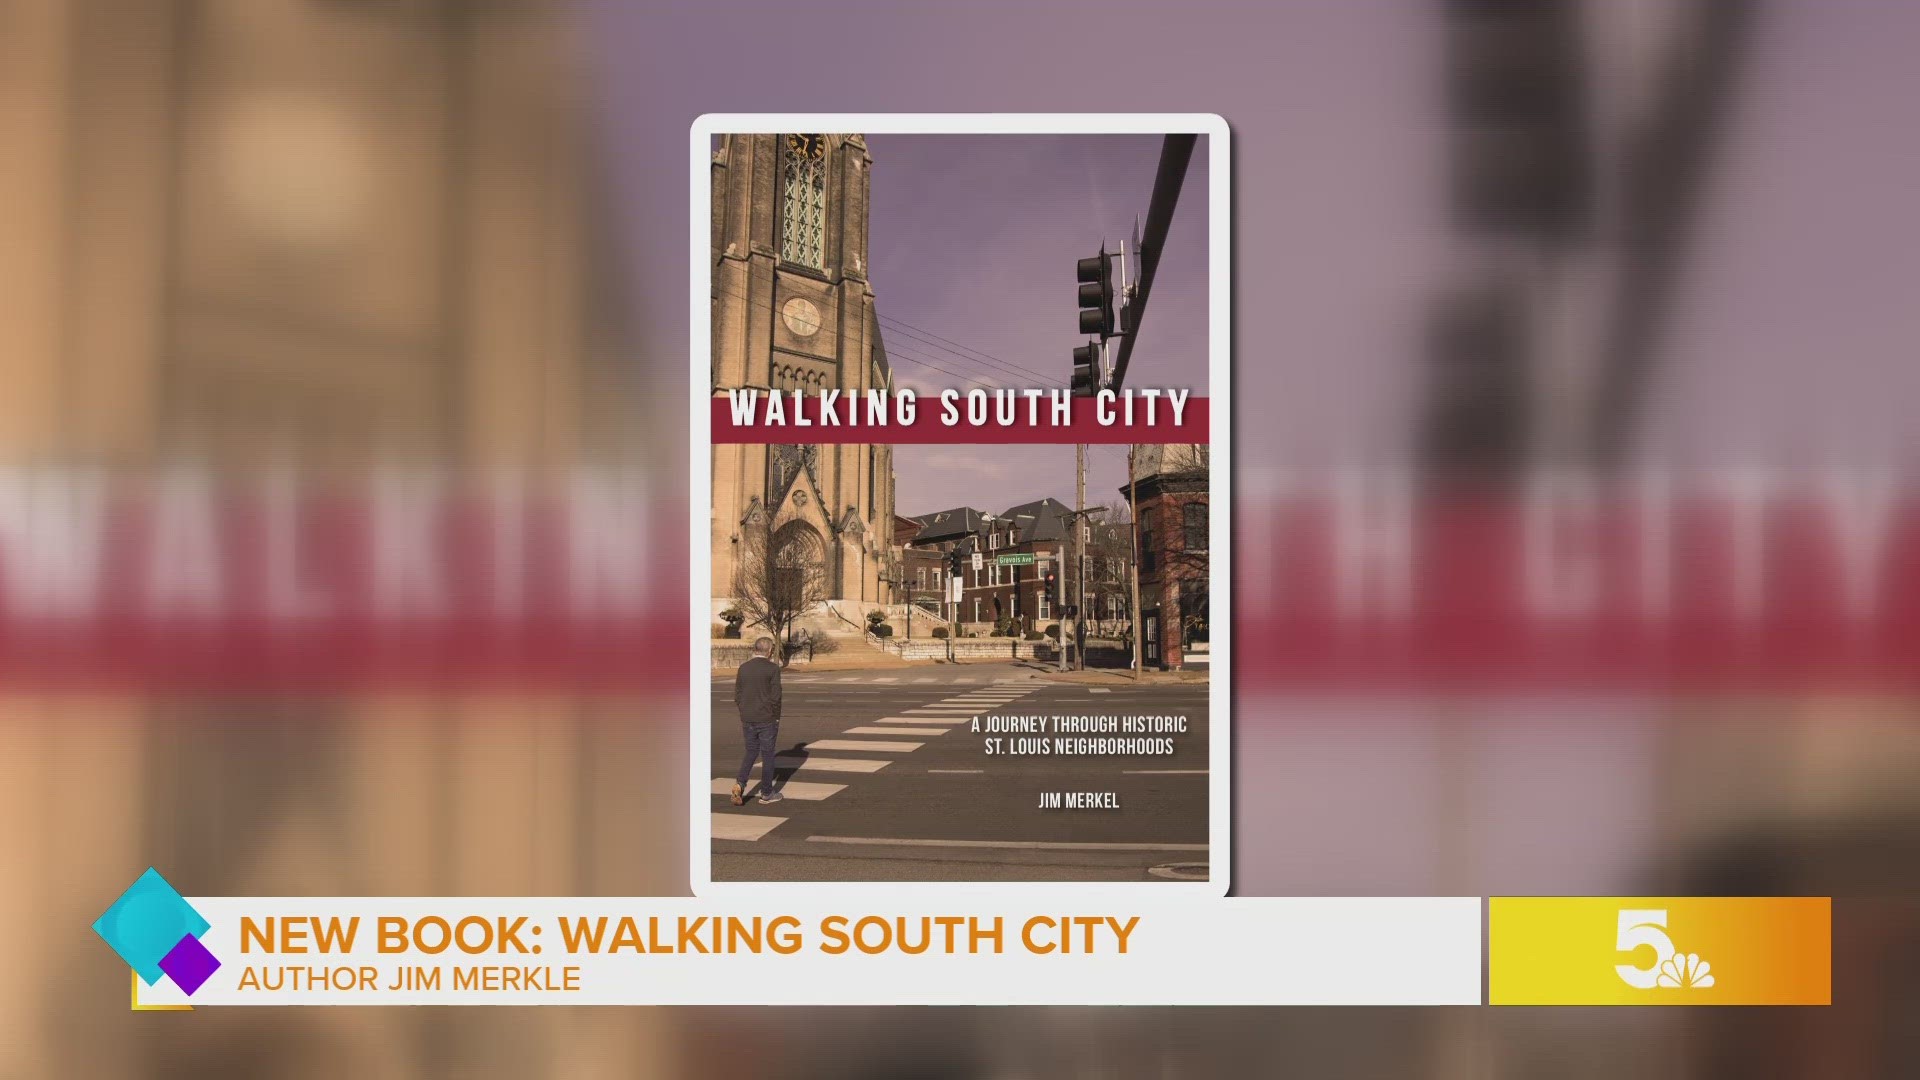 "Walking South City: A Journey Through Historic St. Louis" tells of the quirks and gems author Jim Merkel discovered in a 45-mile jaunt through South St. Louis.